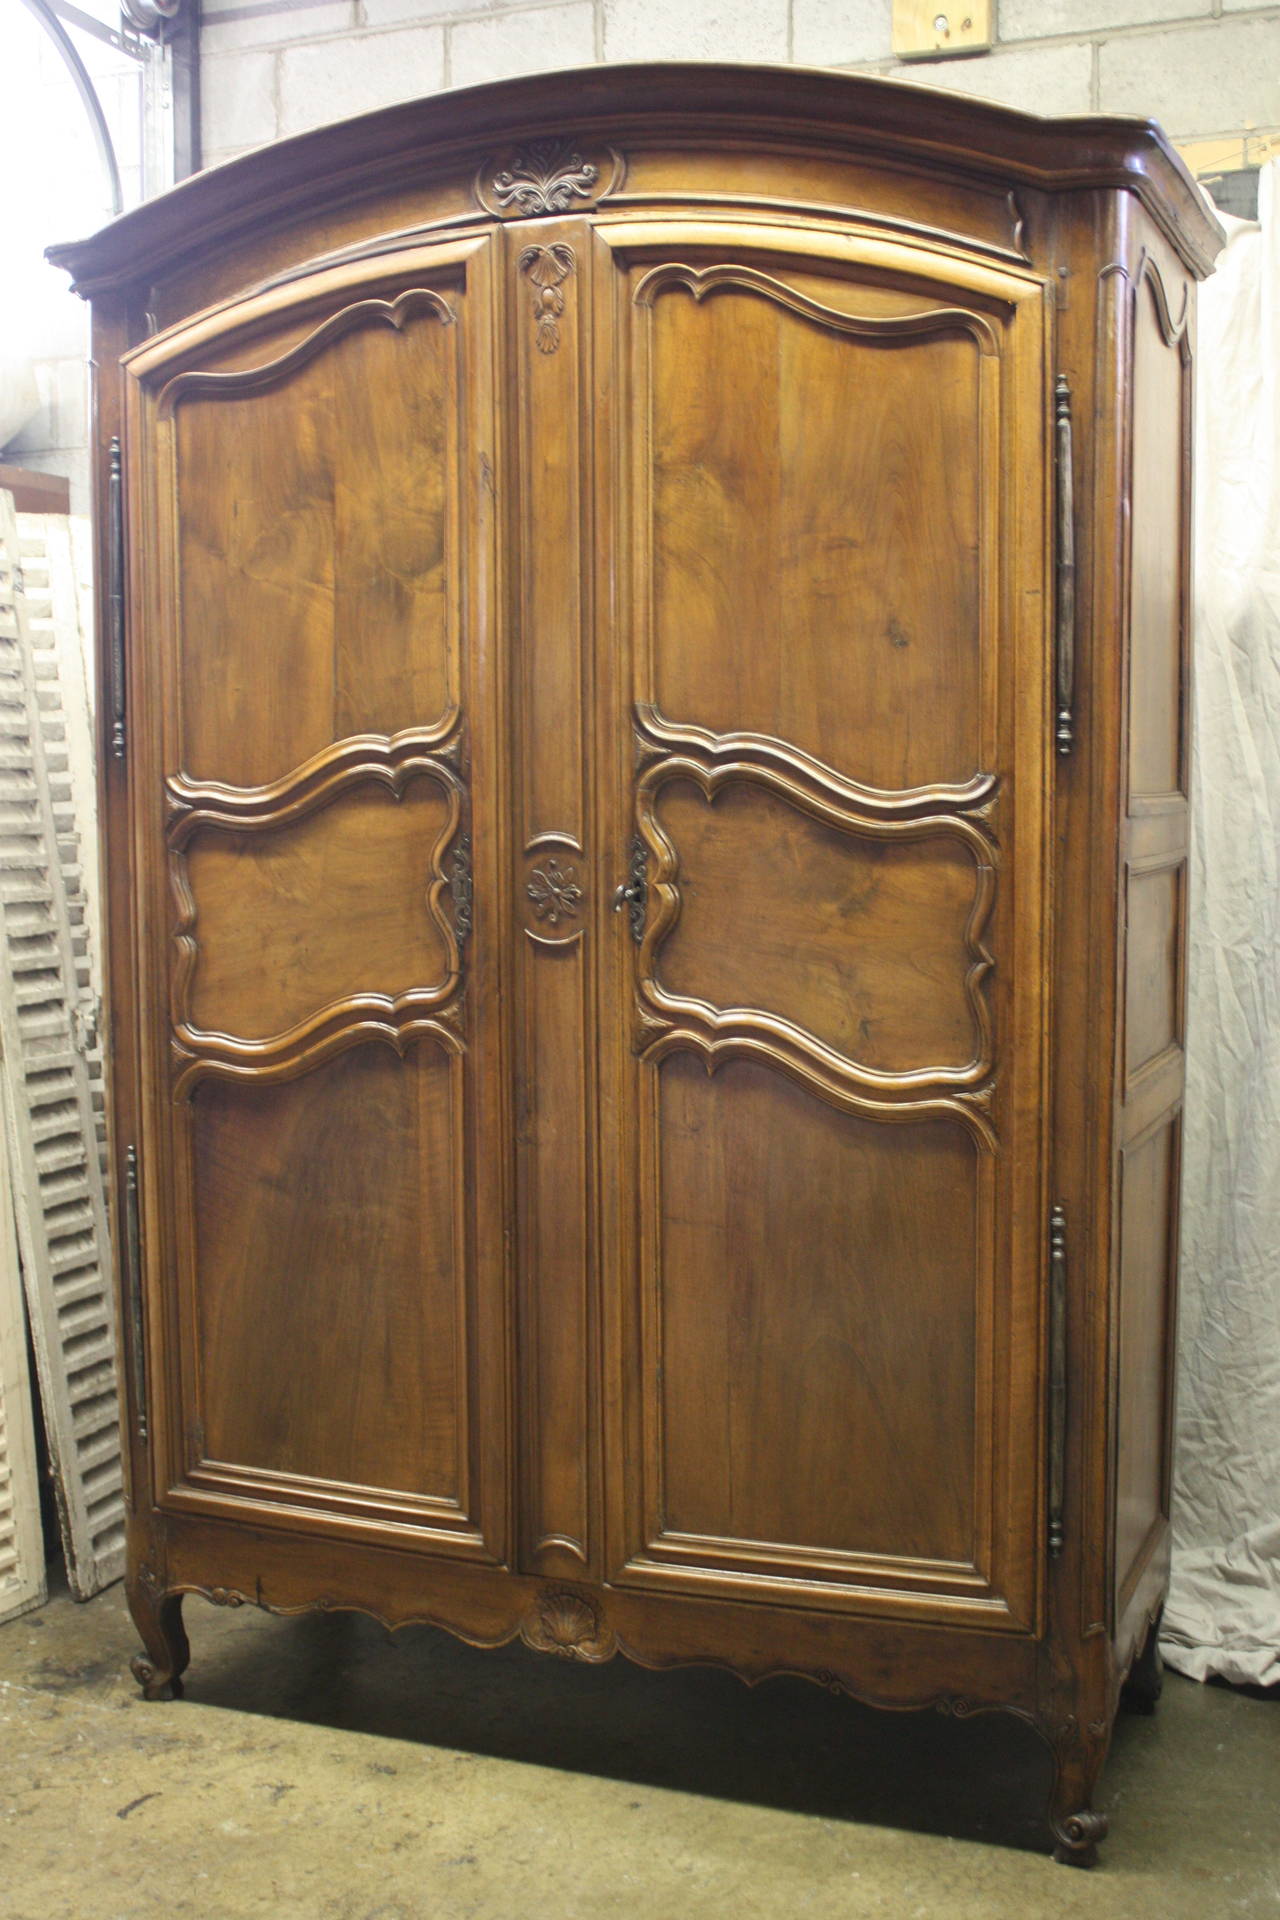 18th century French wardrobe, the wood is carved and made of walnut. Louis XV Period.